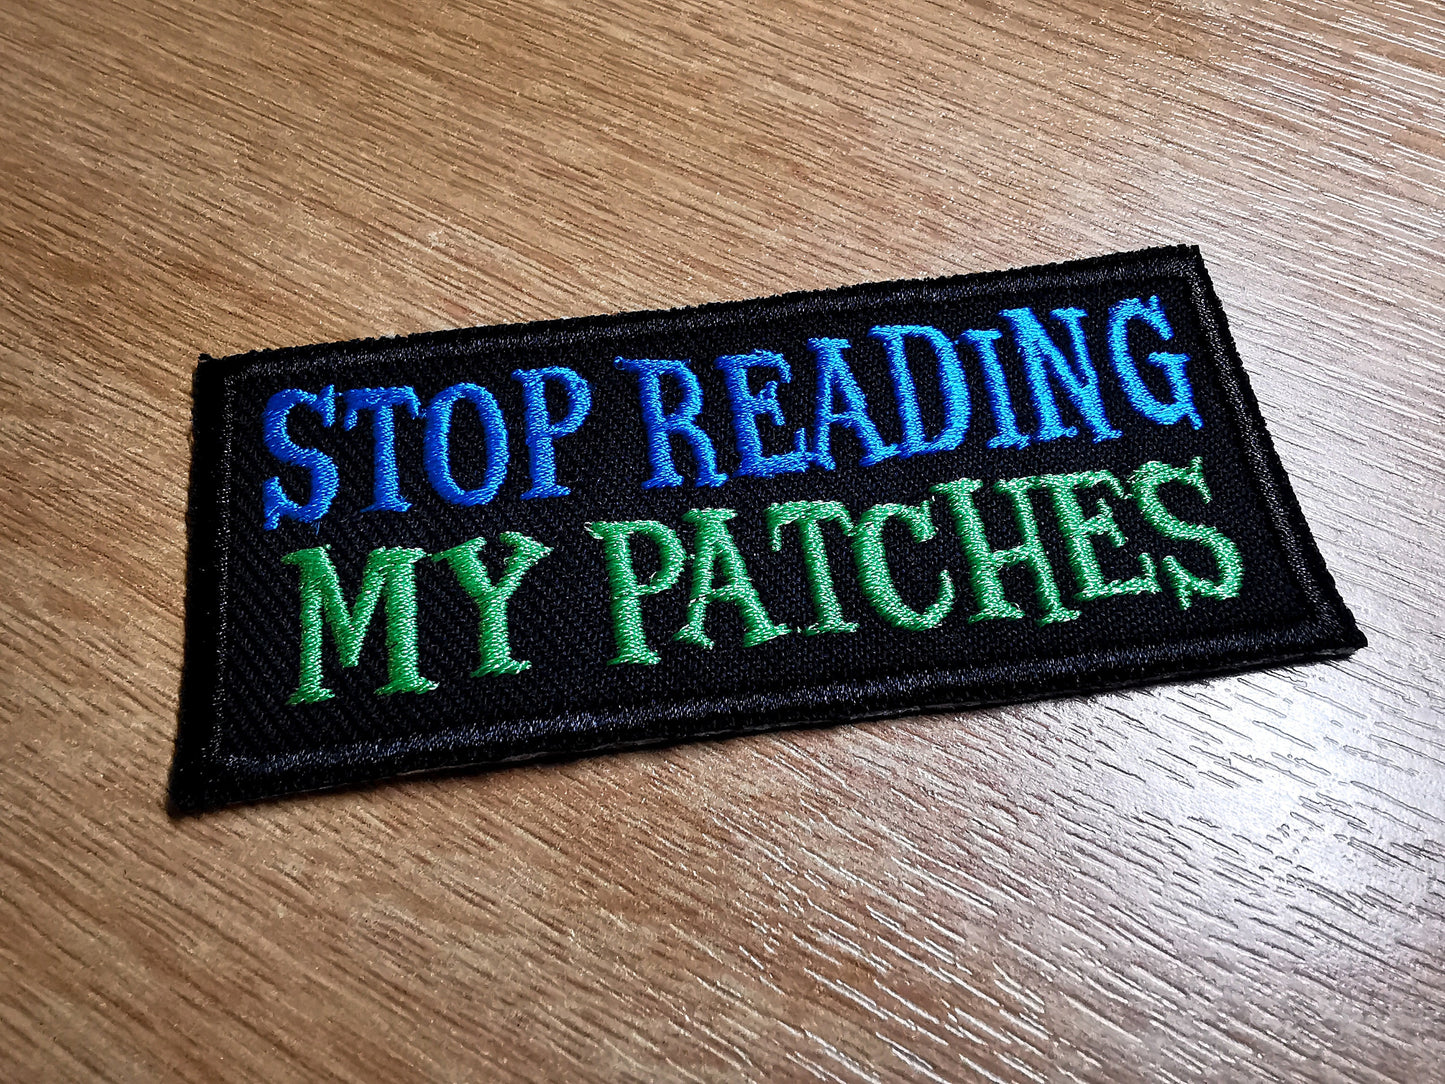 Stop Reading My Patches Funny Embroidered Patch Sarcastic Iron on Patch